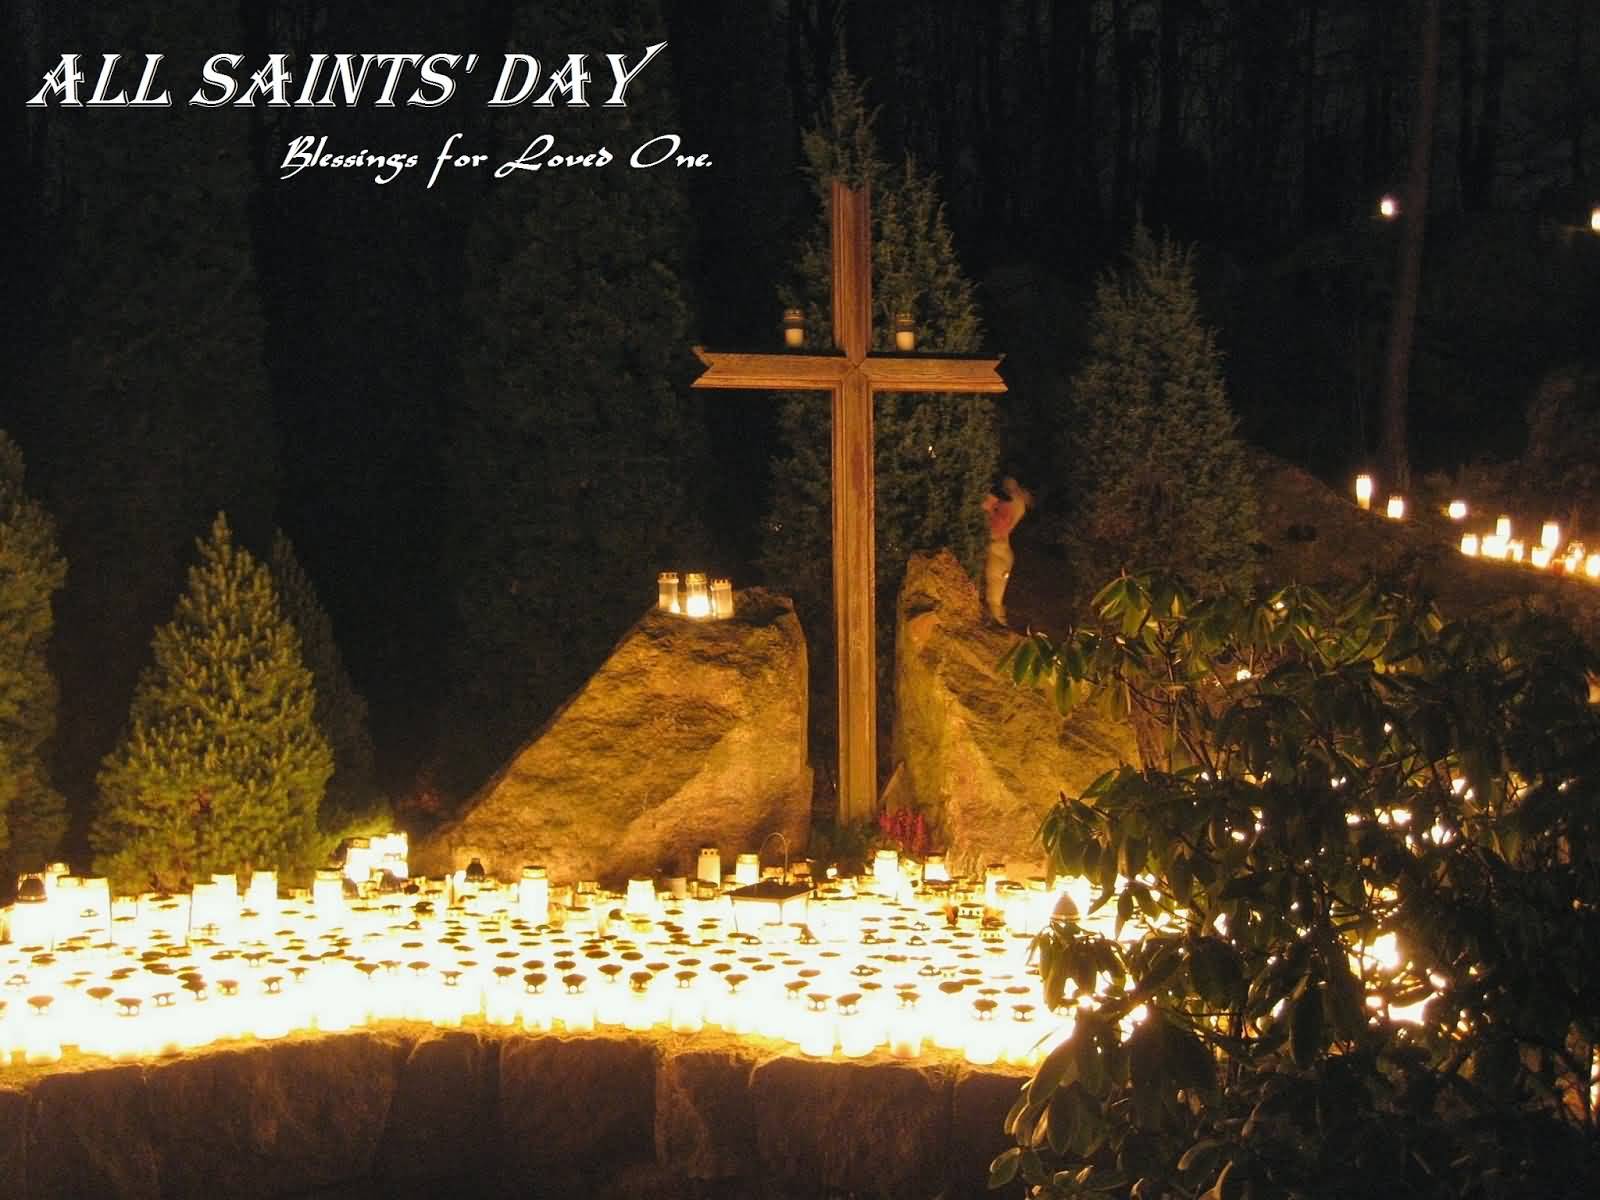 Best All Saints Day Wish Picture And Photo